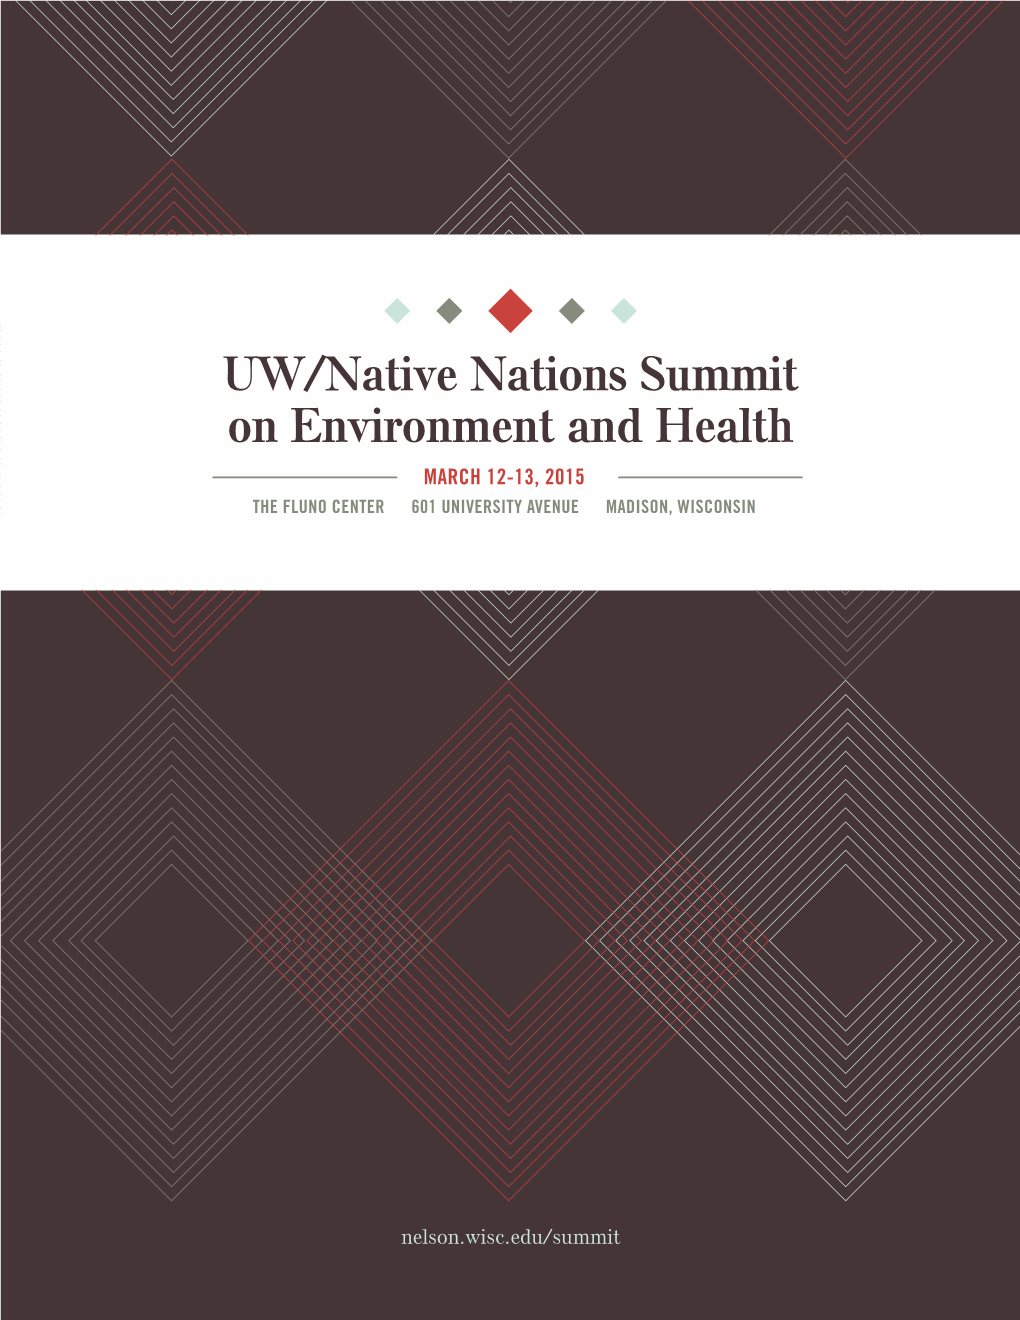 UW/Native Nations Summit on Environment and Health MARCH 12-13, 2015 the FLUNO CENTER 601 UNIVERSITY AVENUE MADISON, WISCONSIN